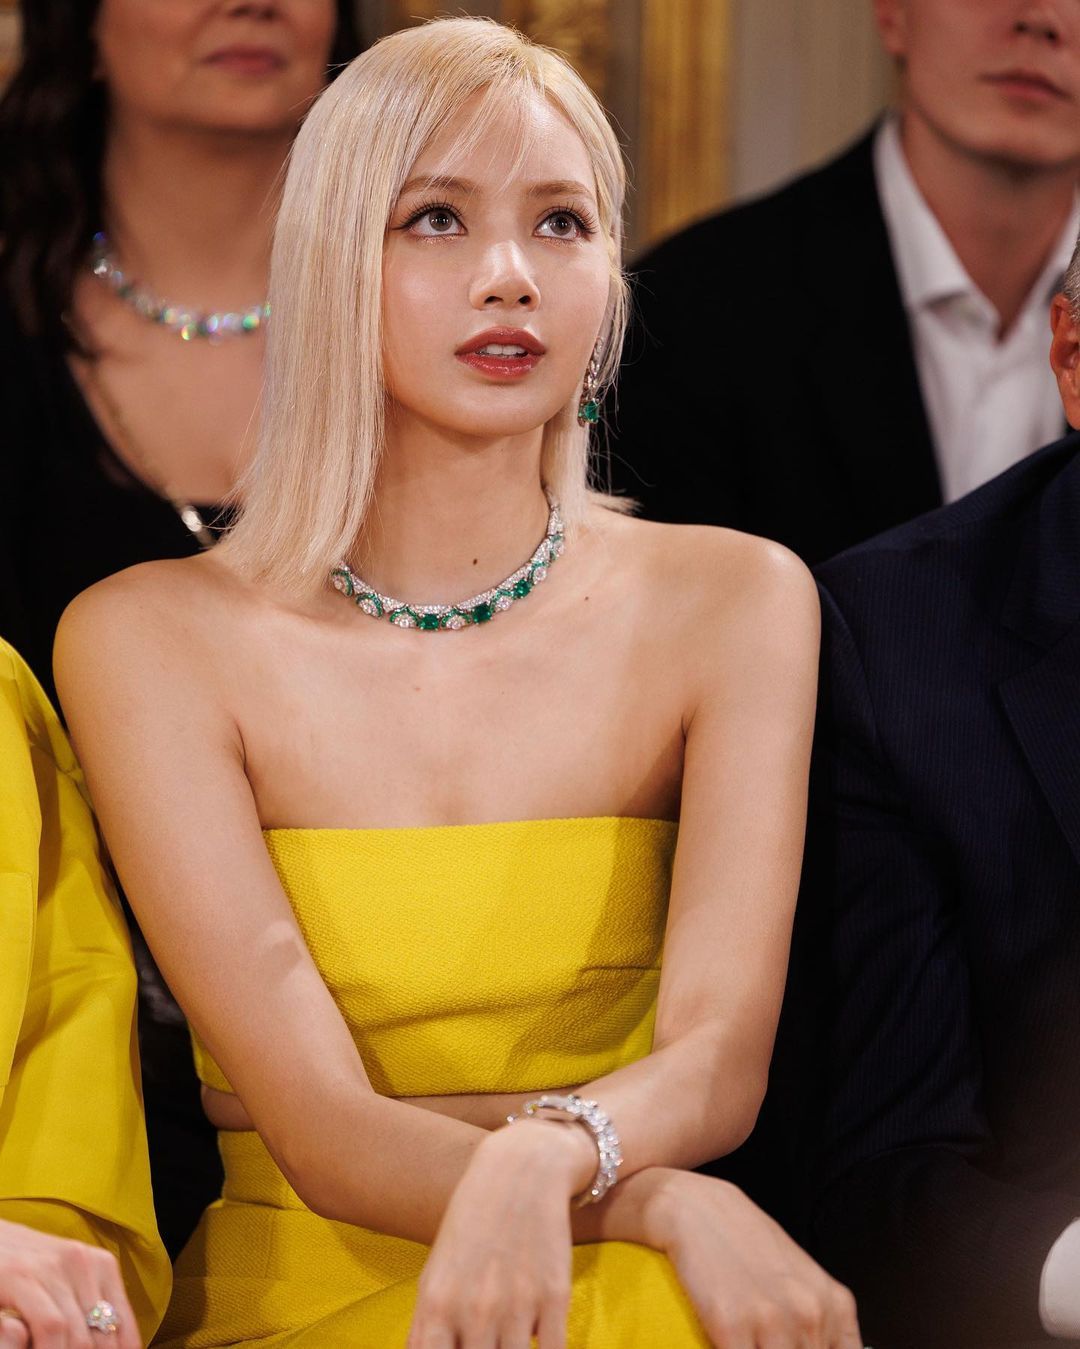 The Jaw-Dropping Price of BLACKPINK Lisa's Jewelry At BVLGARI's Avrora  Awards Shows She Is Truly The Brand's 